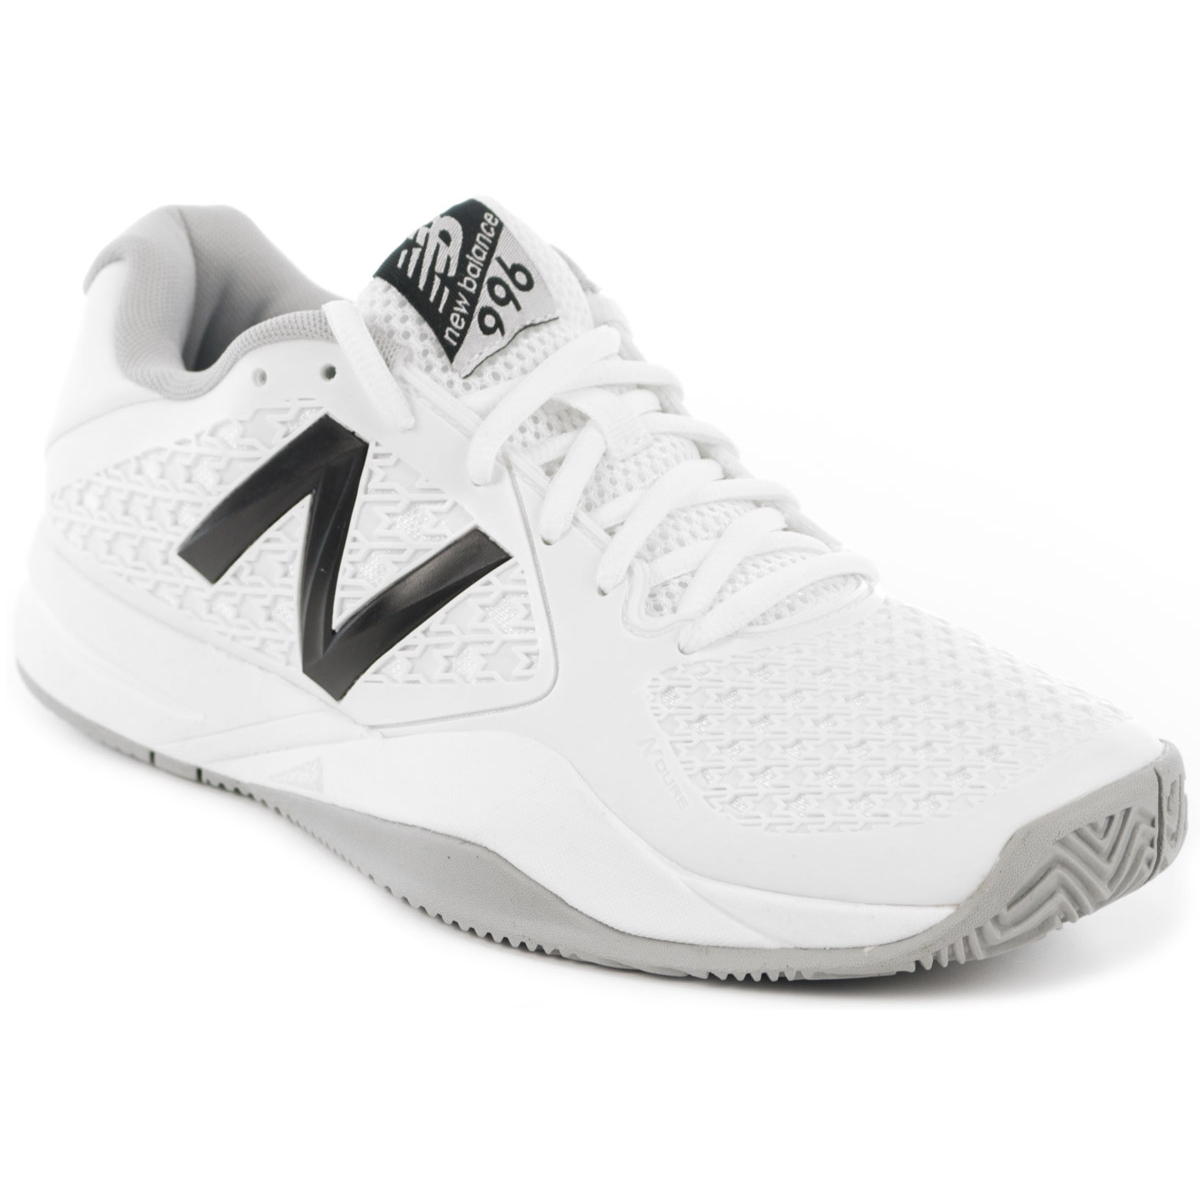 new balance homme blanche, Chaussures New Balance Femme WC996 Blanches ...